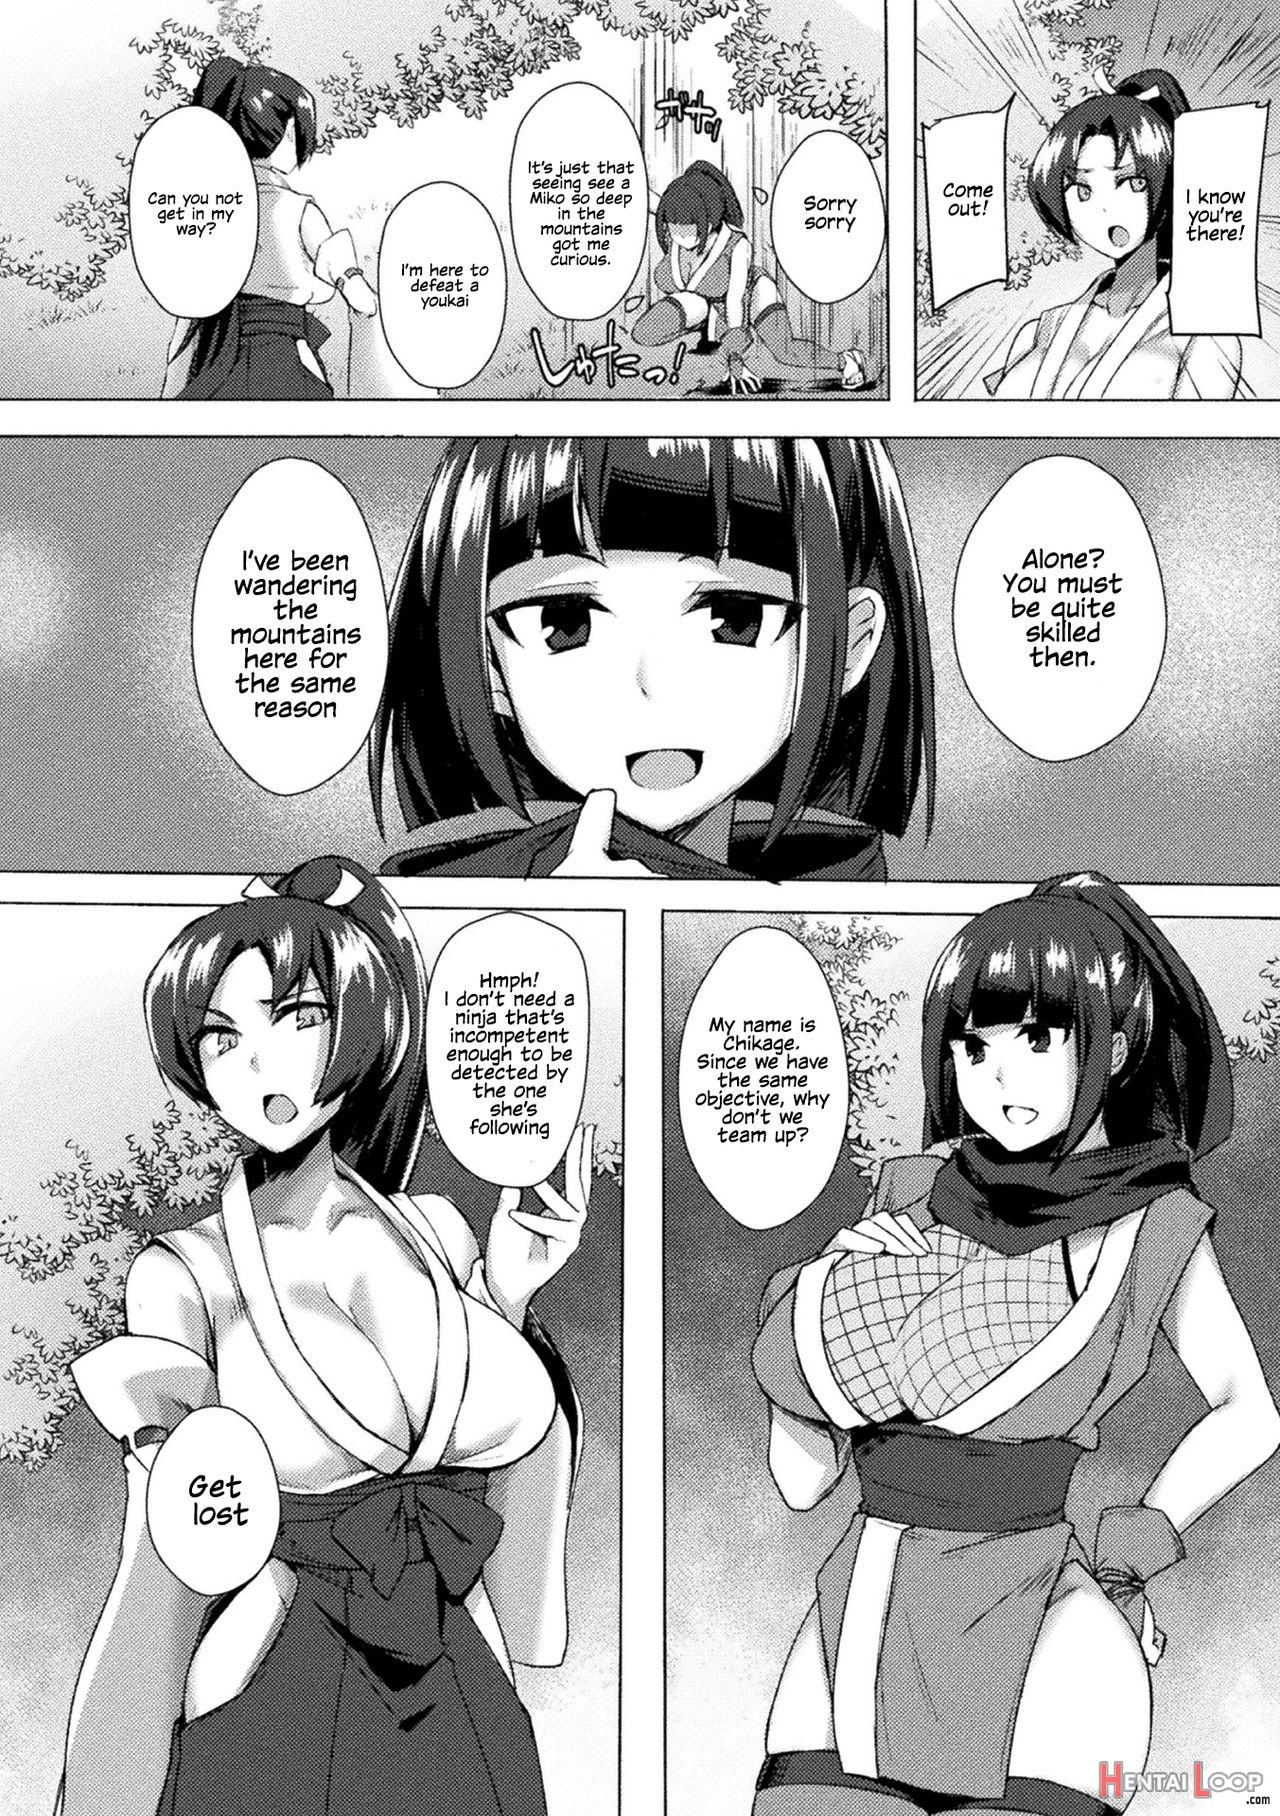 Futanari Girls Forcefully Impregnating Others With A Mating Press! Vol. 1 page 20